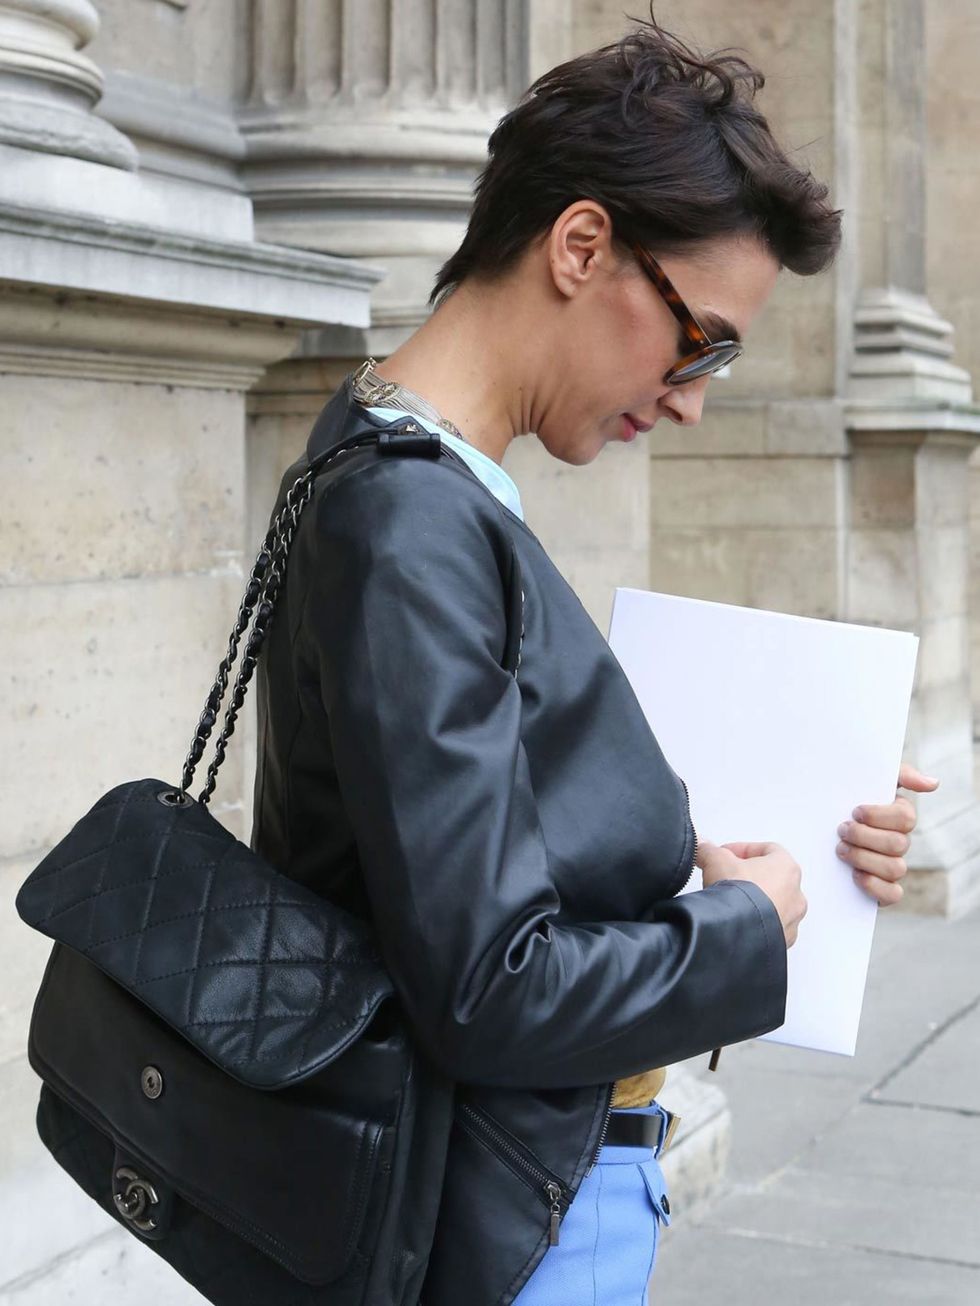 <p>Beautifully cropped hair and a Chanel handbag. J'adore!</p><p><a href="http://www.elleuk.com/style/street-style/paris-fashion-week-sept-oct-2012"></a></p>